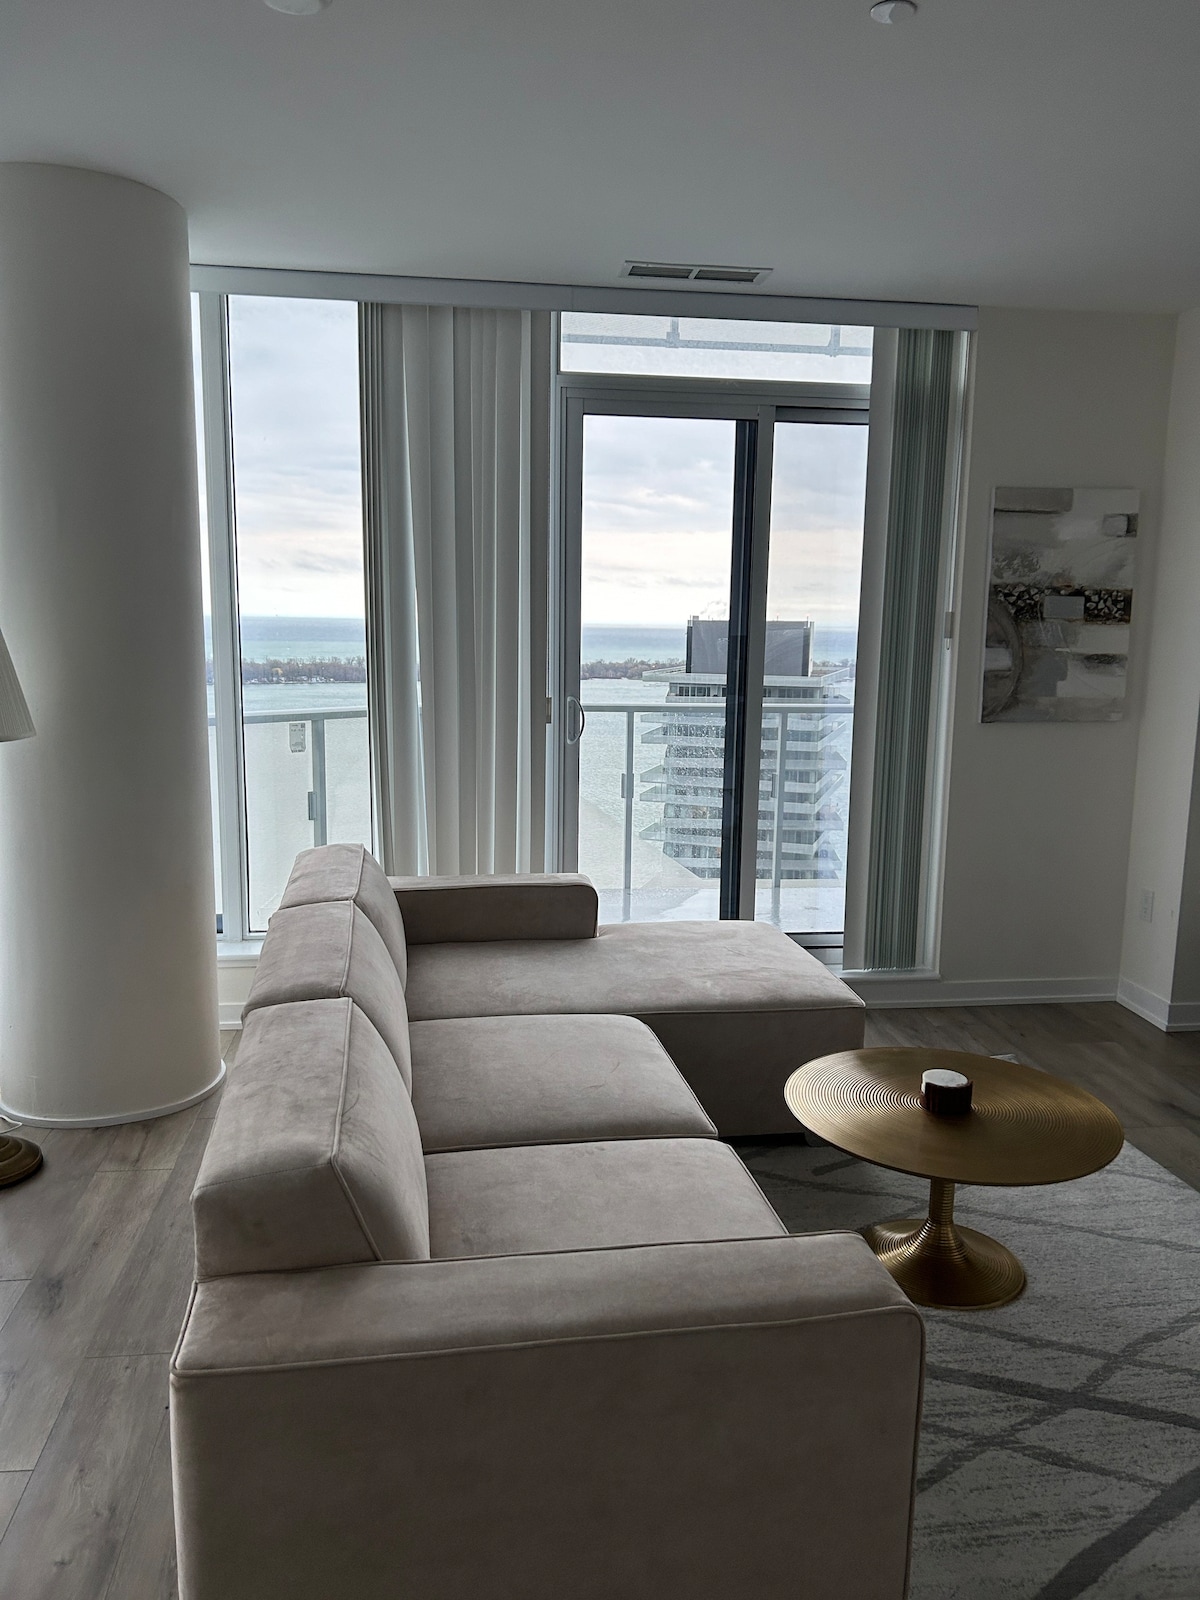 Luxury 2bd Waterfront Condo with stunning views